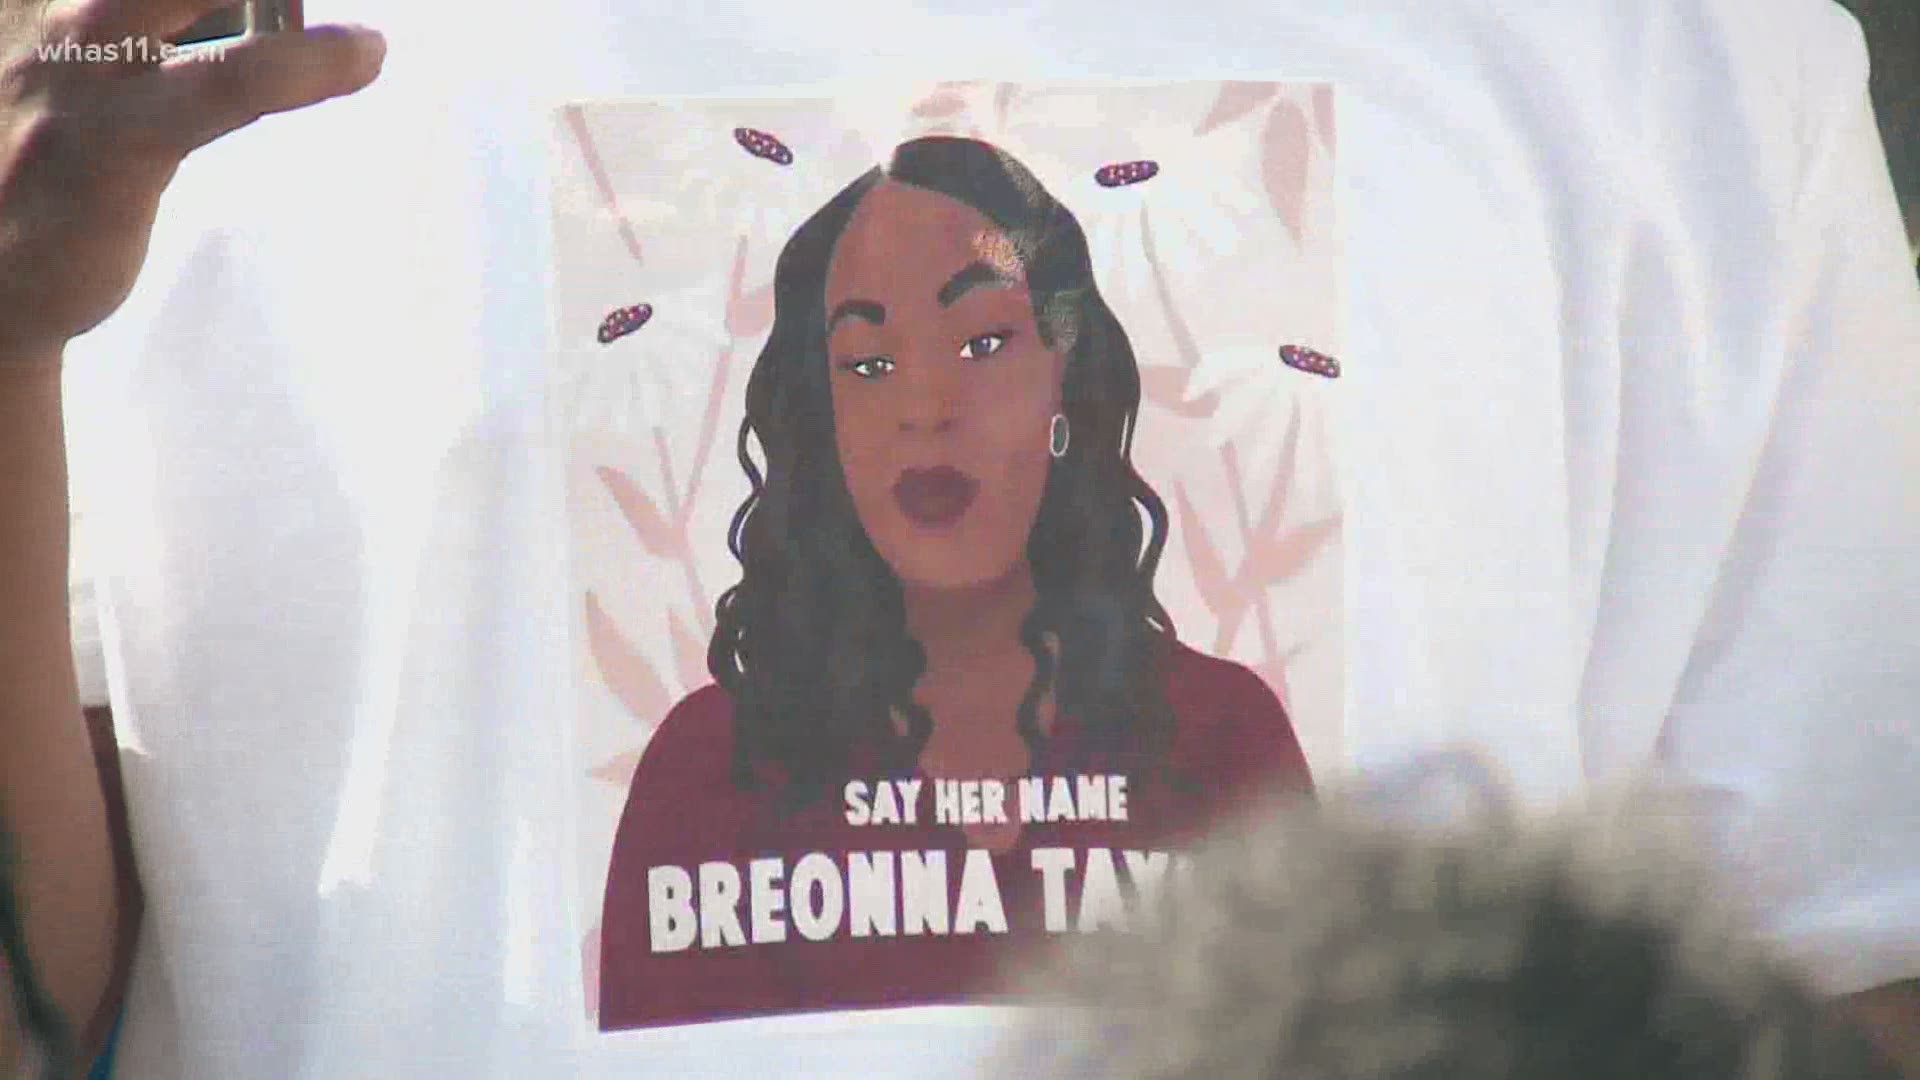 The community rallied around Taylor's family nearly three months after she was killed when police executed a no-knock warrant at night while she slept.